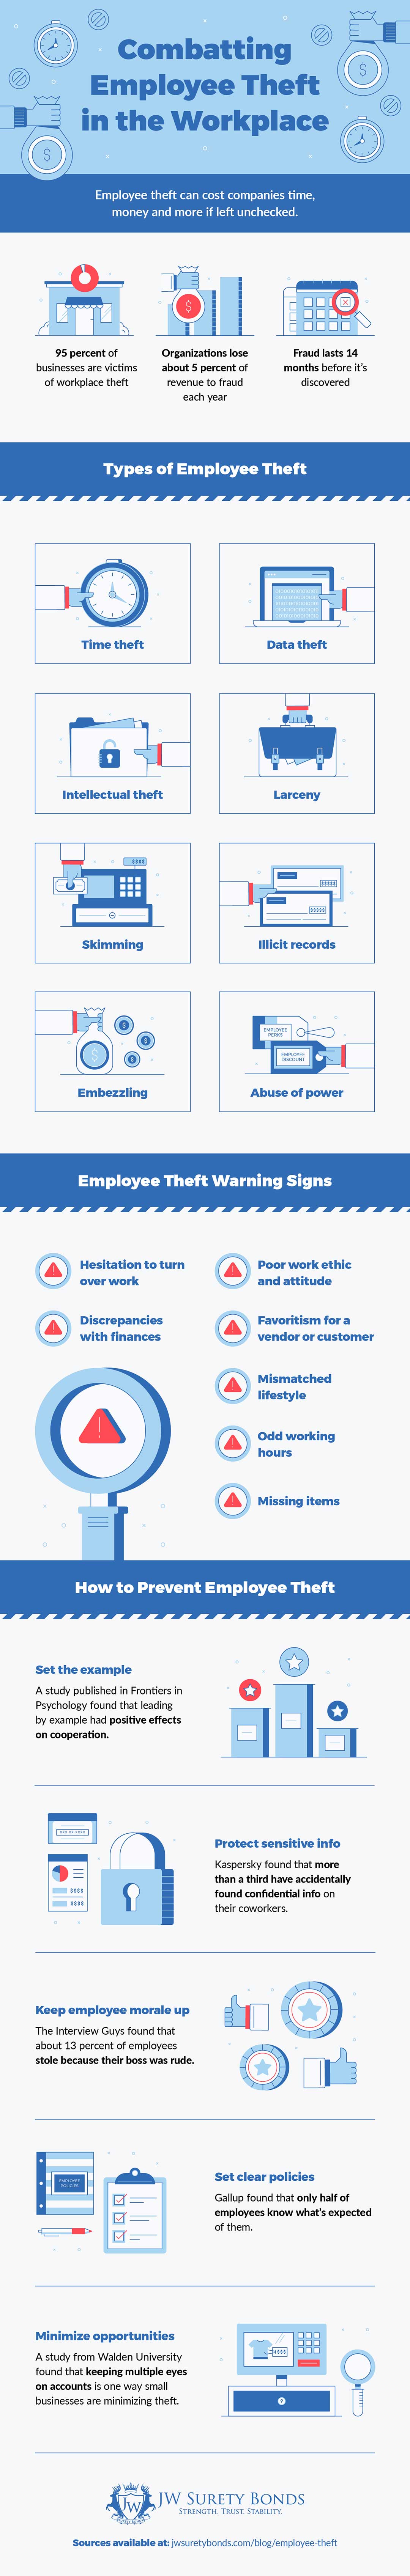 How to Spot and Prevent Employee Theft 